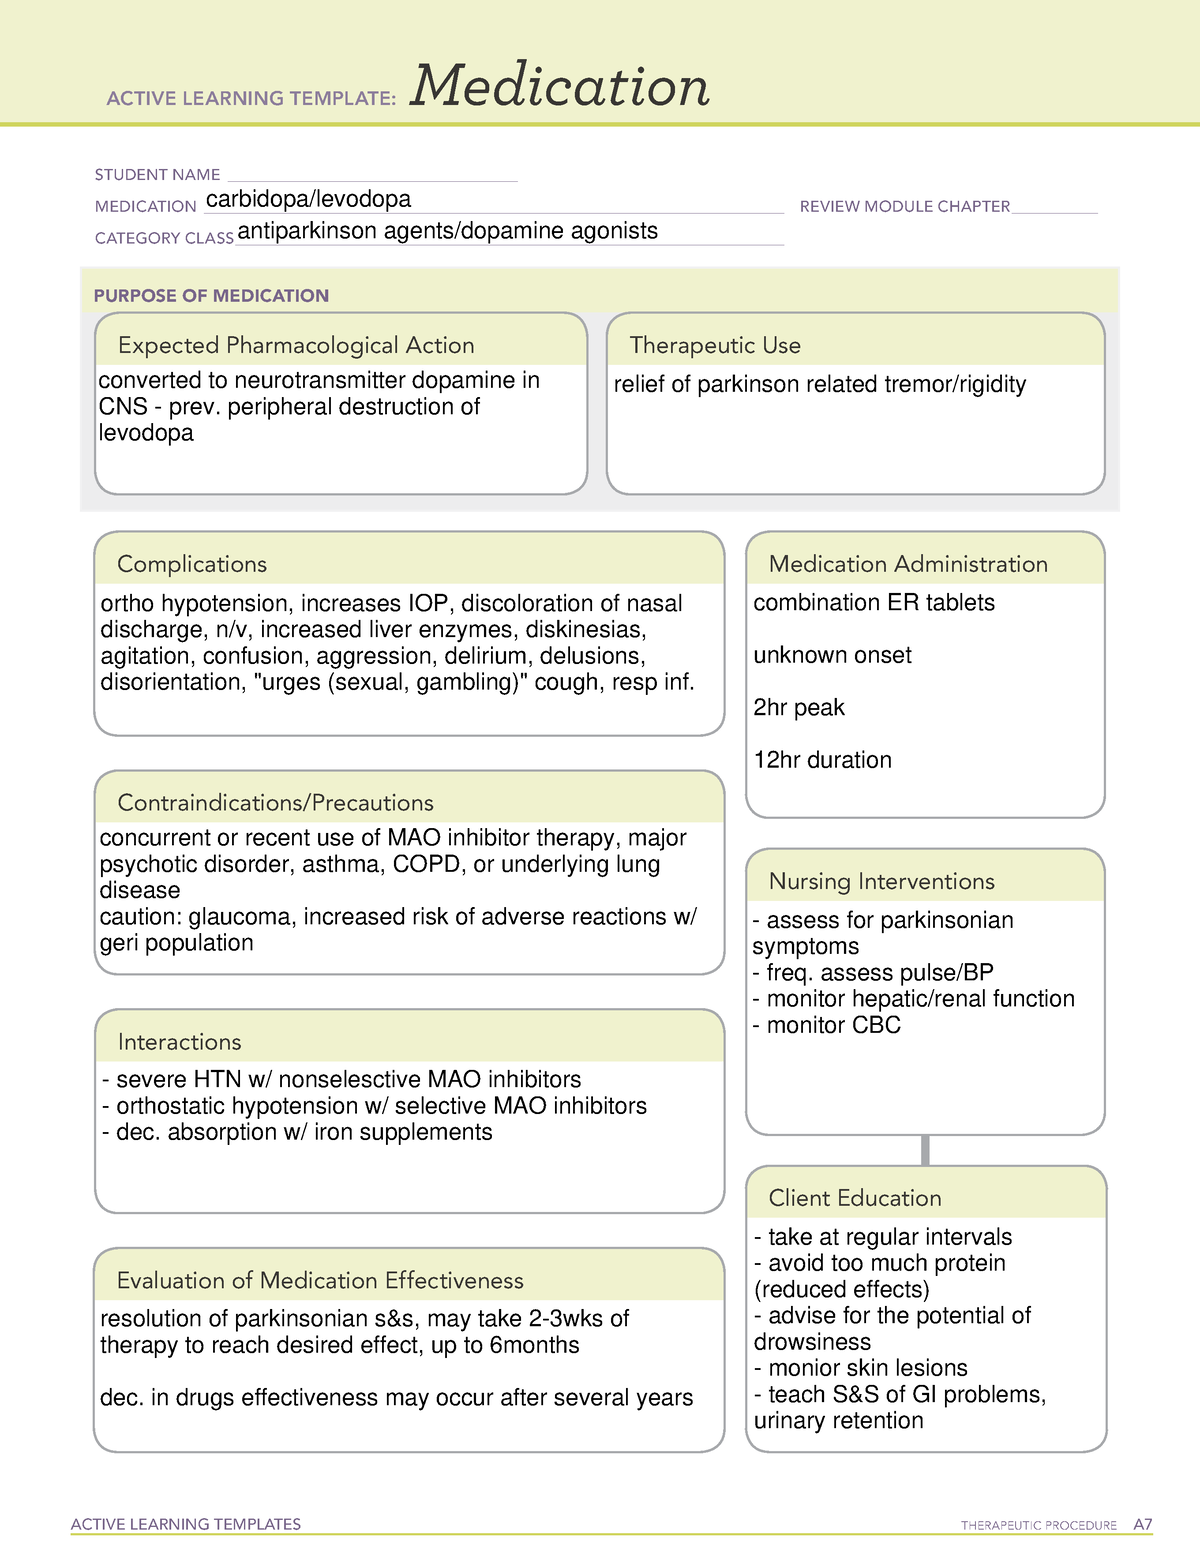 Med template carbidopa, levodopa ACTIVE LEARNING TEMPLATES